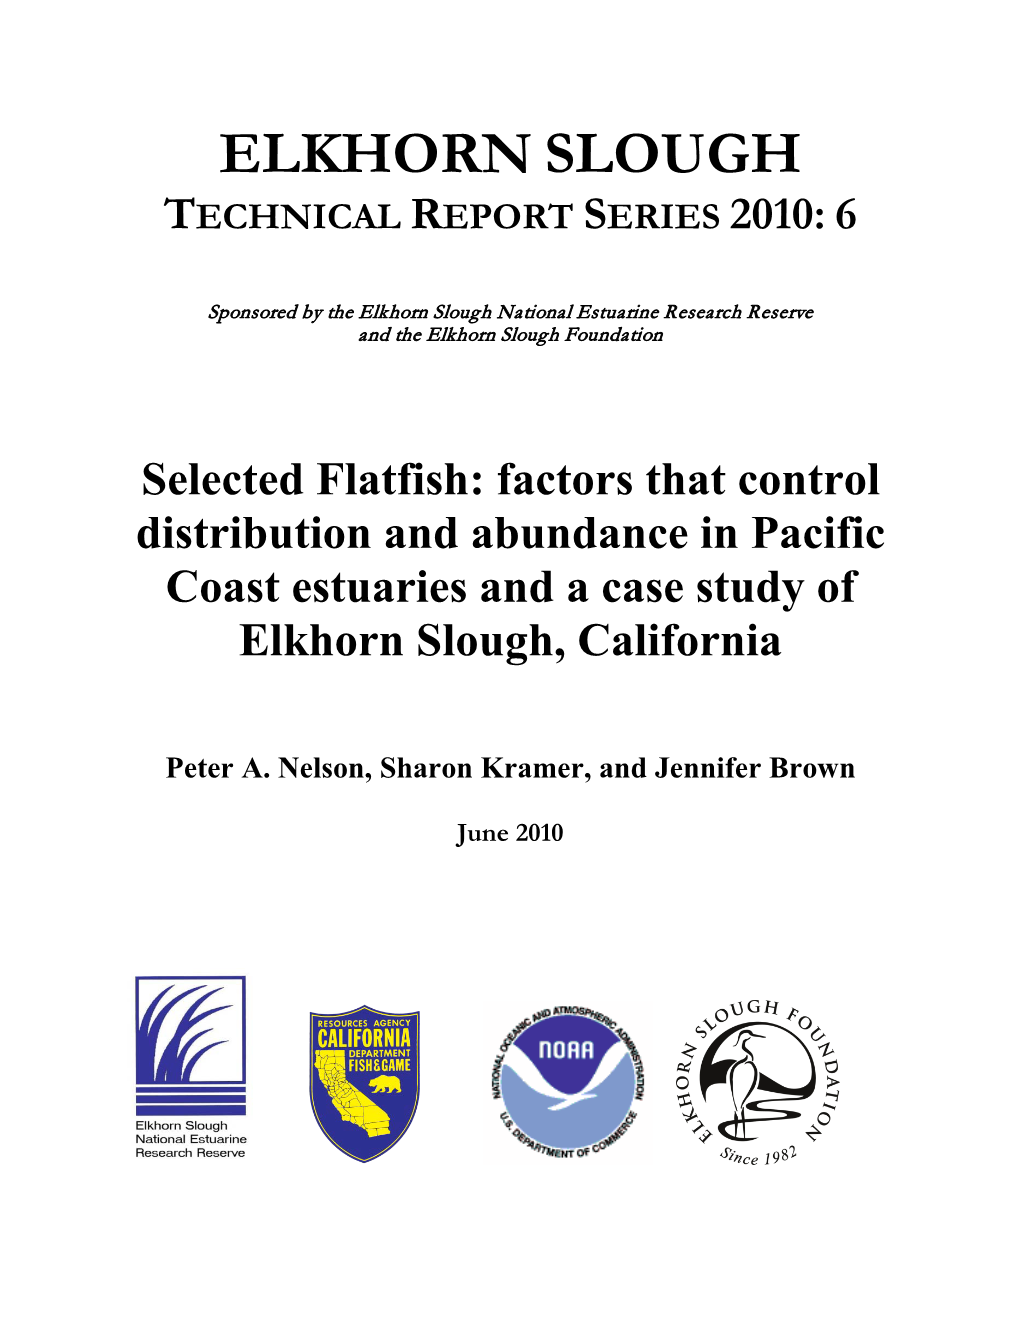 Selected Flatfish: Factors That Control Distribution and Abundance in Pacific Coast Estuaries and a Case Study of Elkhorn Slough, California